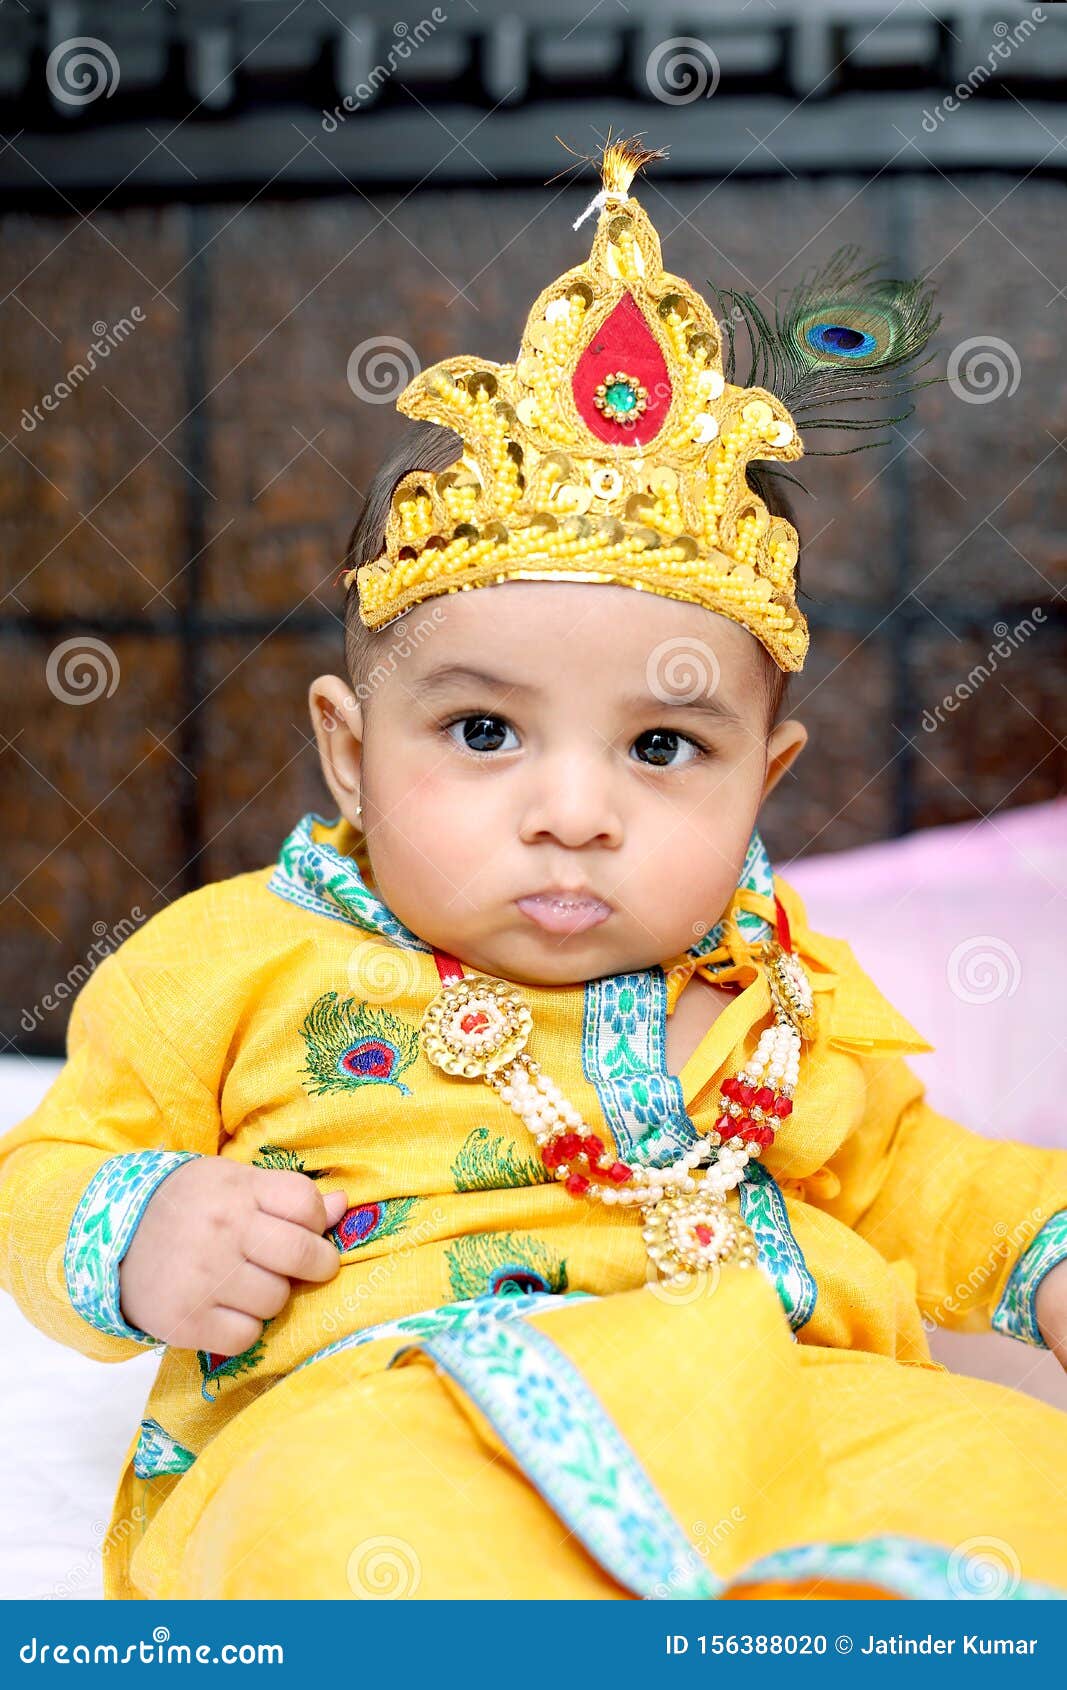 Picture of Baby krishna. stock photo. Image of festival - 156388020